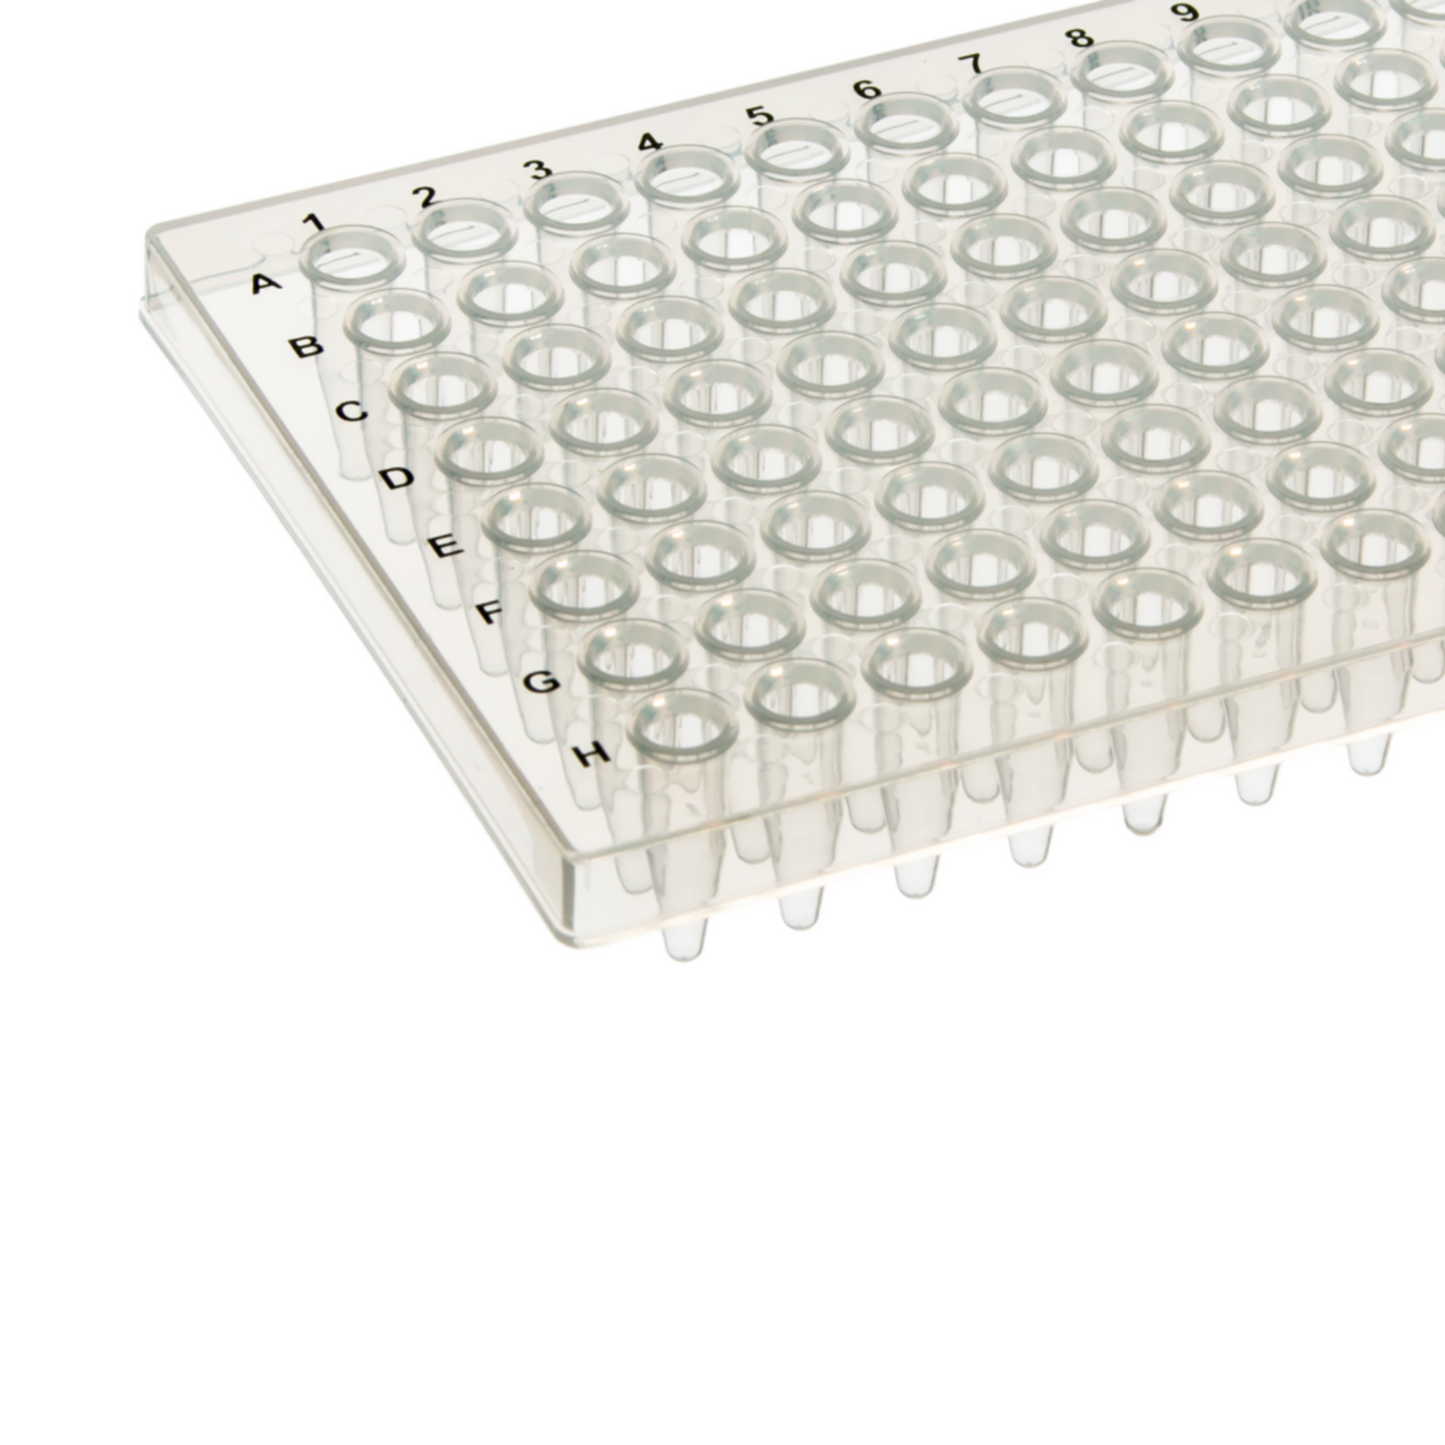 96-Well PCR Plate,Dual Barcode, Semi-Skirted, Straight Edges, natural, Overpack of 100 plates (I1402-9800)